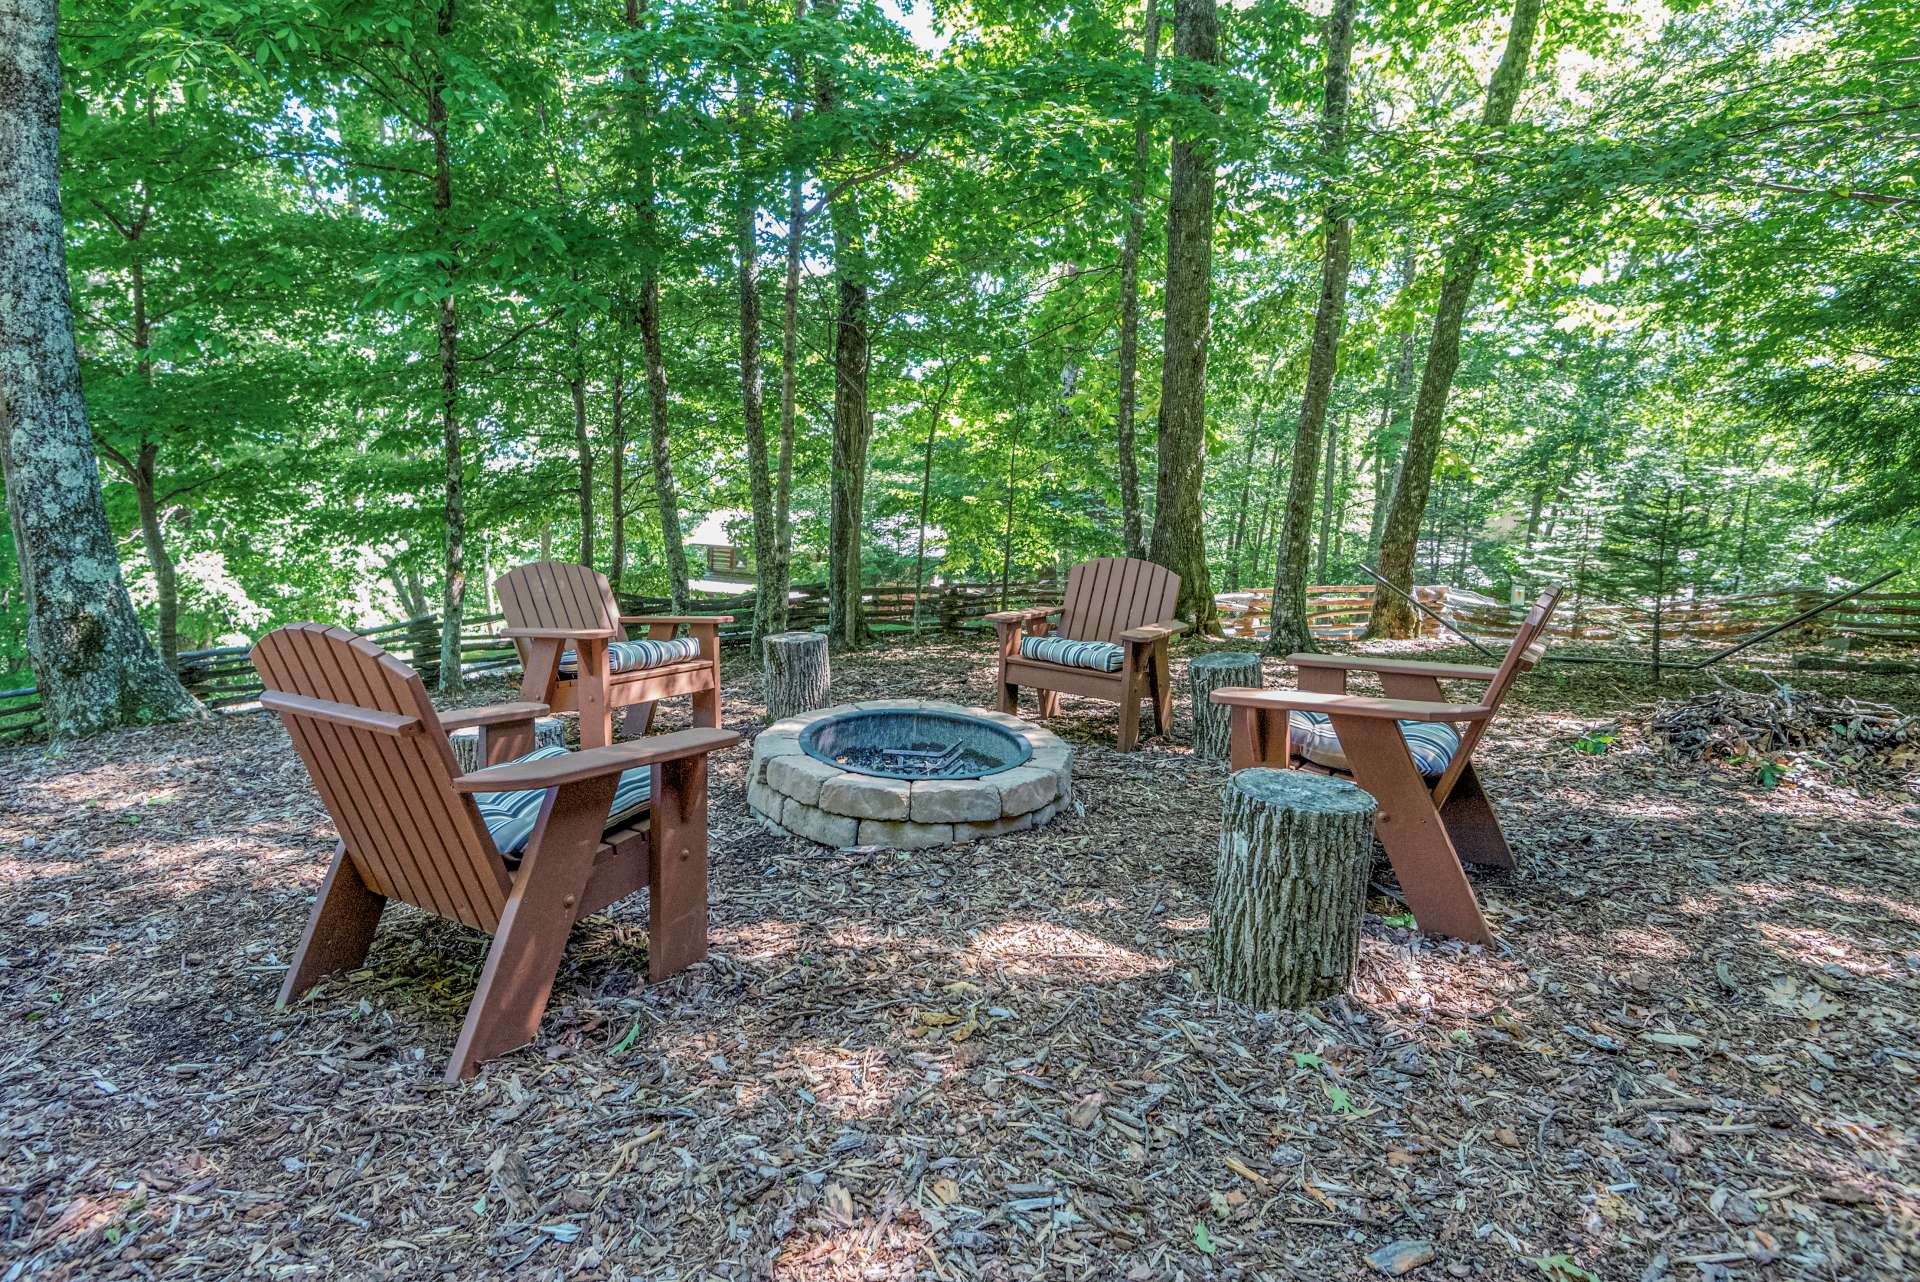 Sit and relax by the fire pit area located in the fenced in back yard. Get your ghost stories ready, and bring plenty of marshmallows.